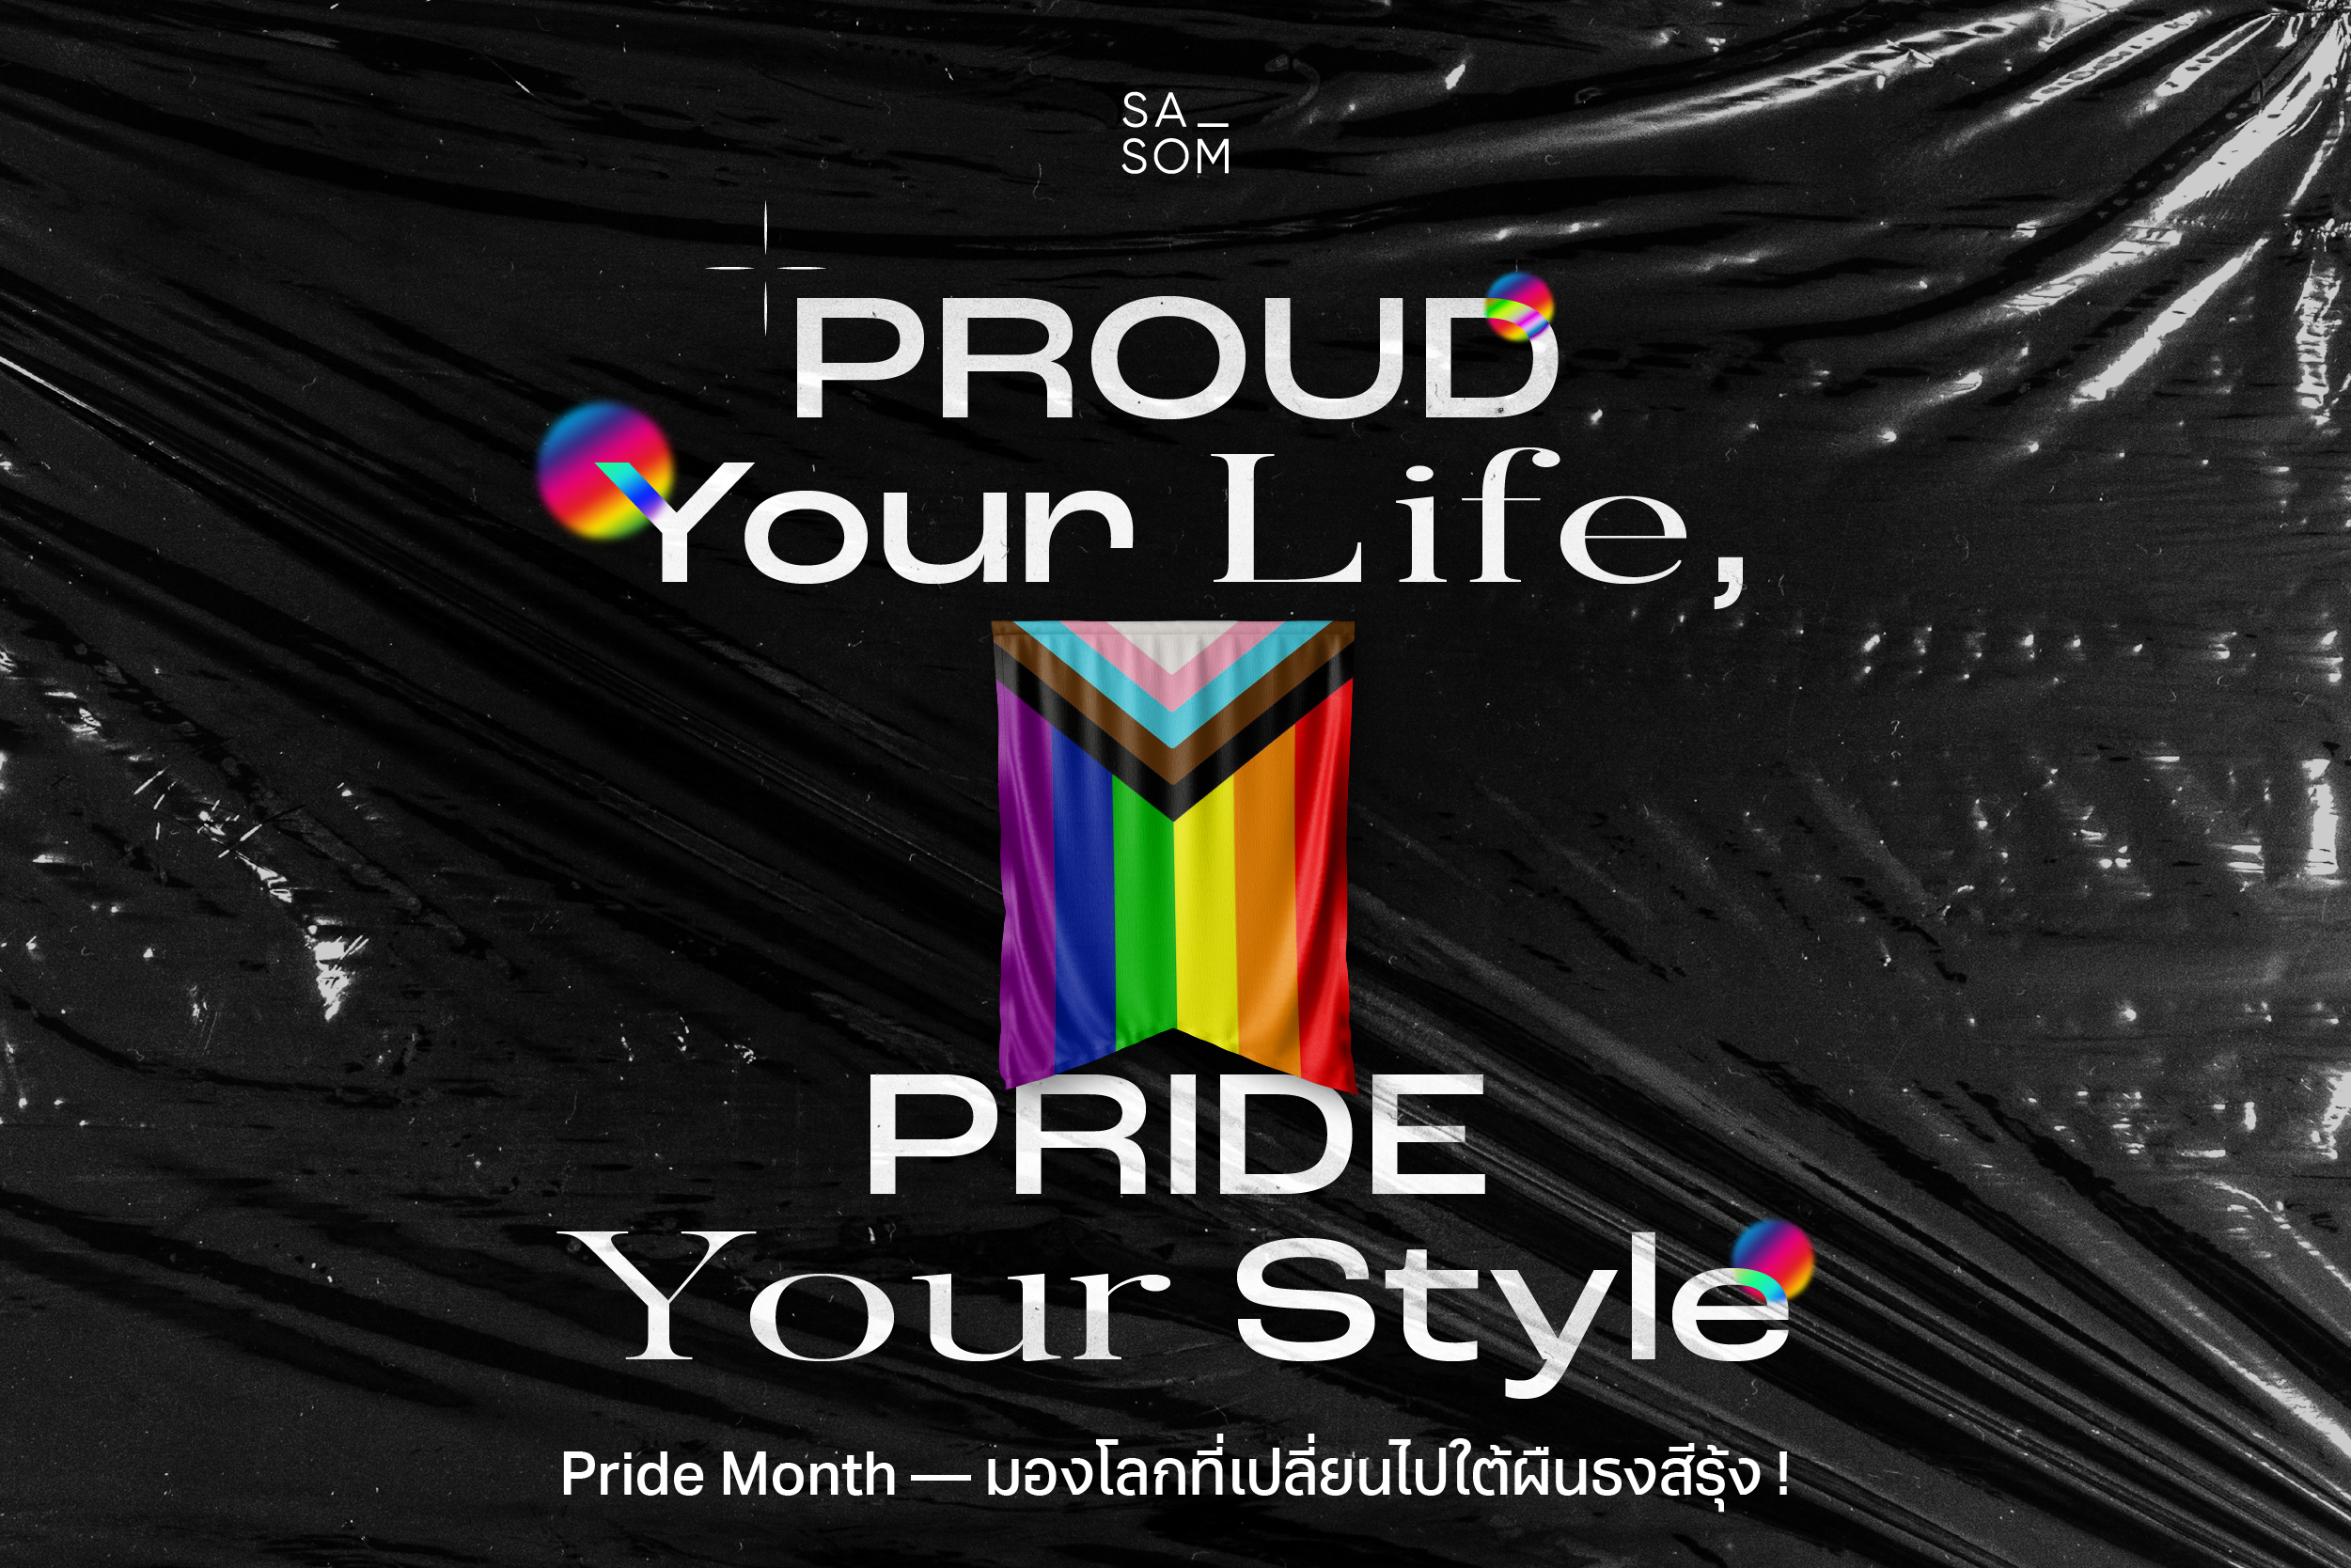 Proud your Life, Pride your Style